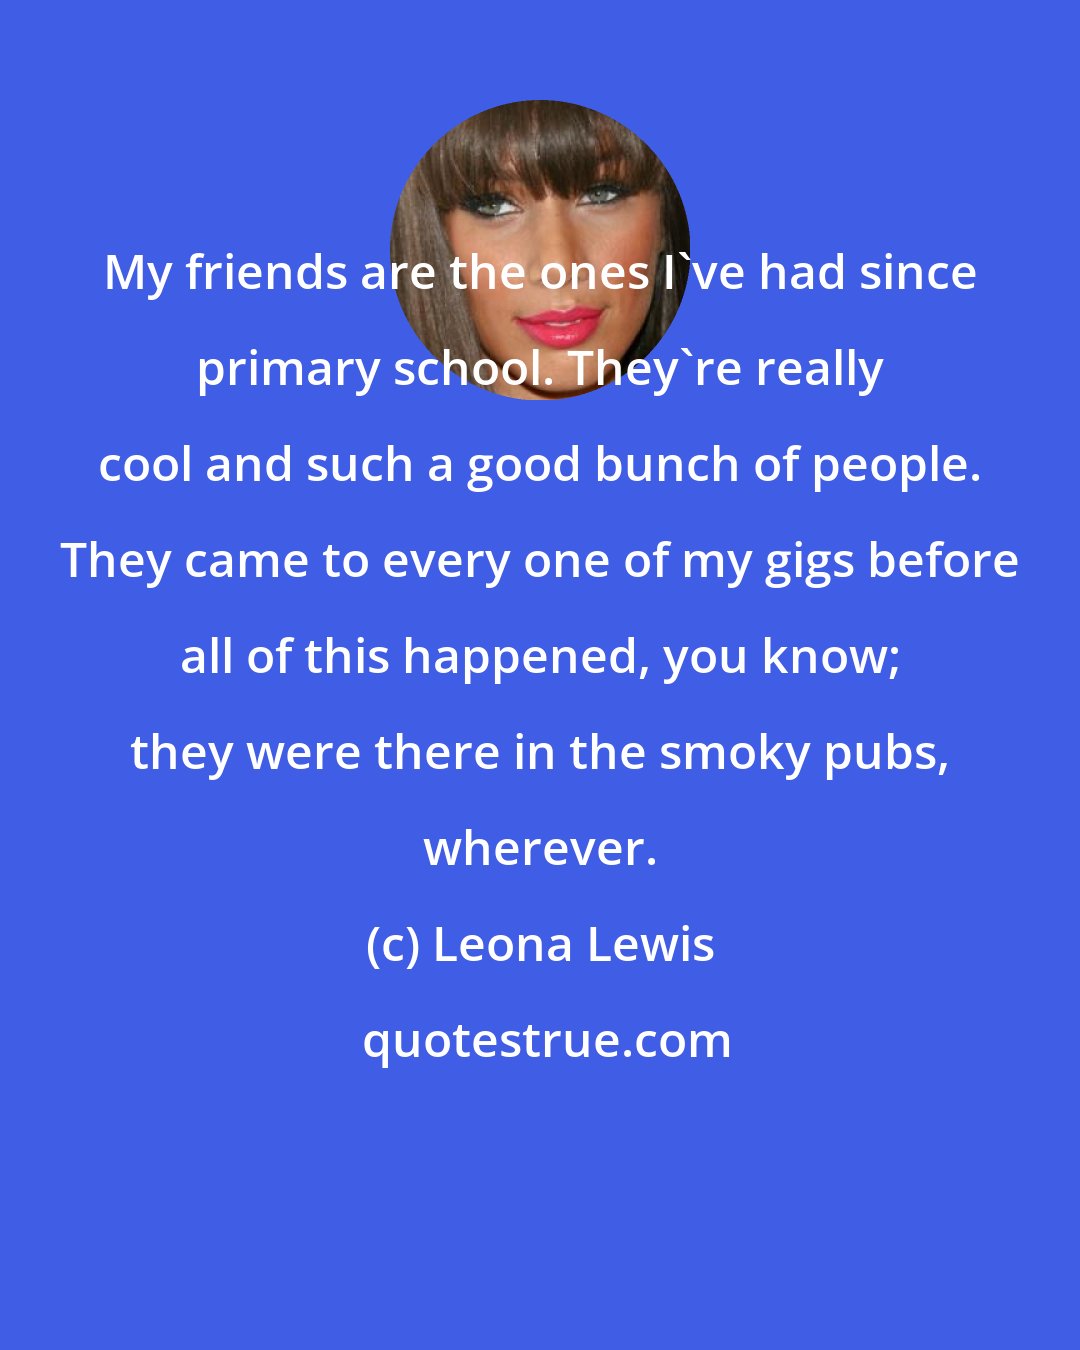 Leona Lewis: My friends are the ones I've had since primary school. They're really cool and such a good bunch of people. They came to every one of my gigs before all of this happened, you know; they were there in the smoky pubs, wherever.